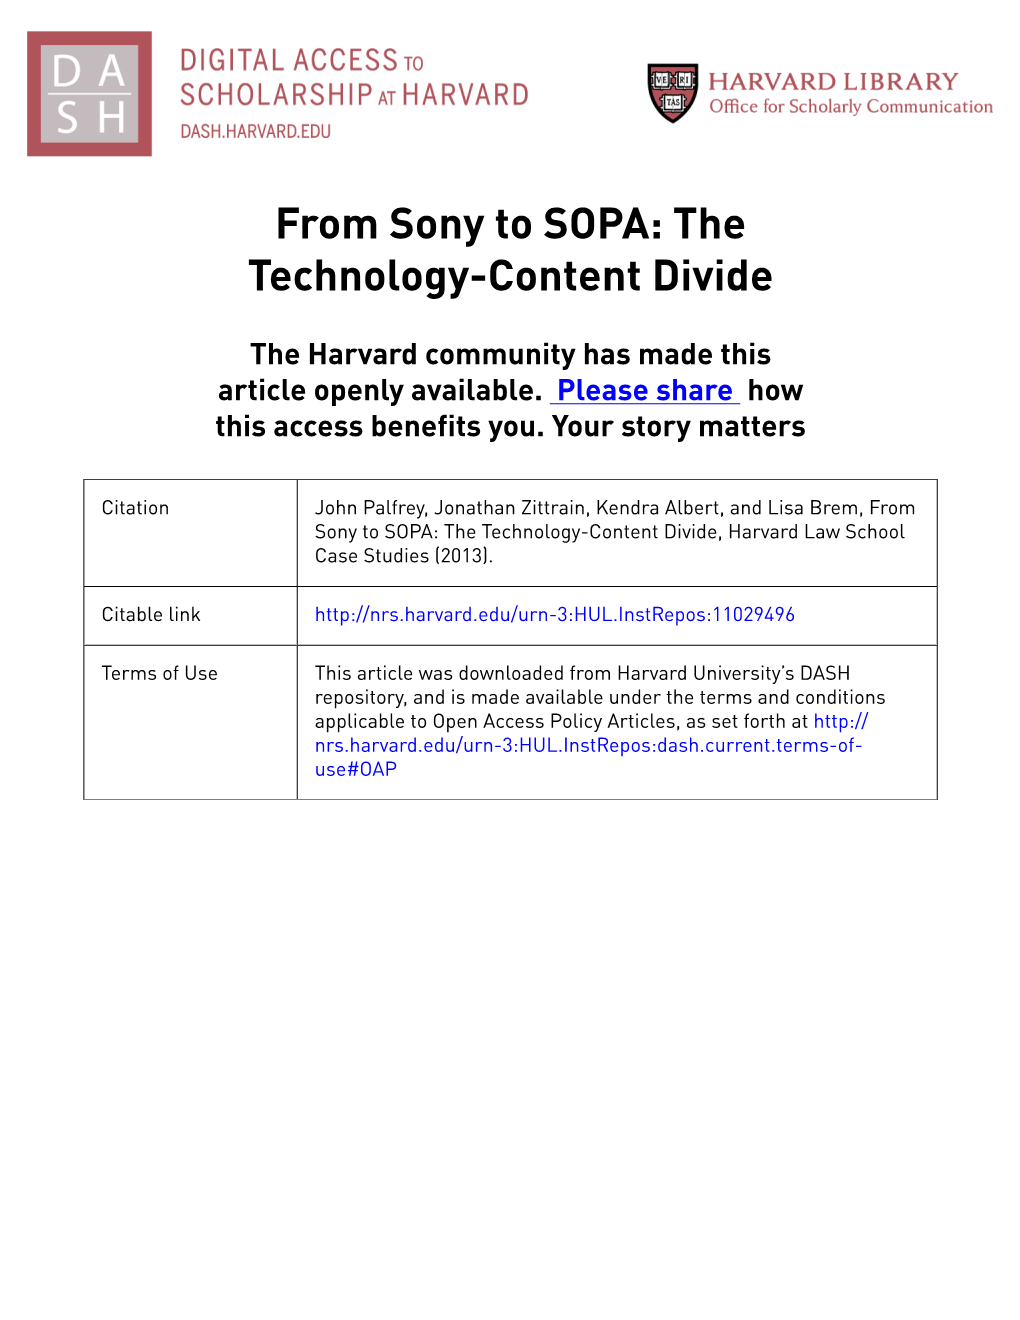 From Sony to SOPA: the Technology-Content Divide